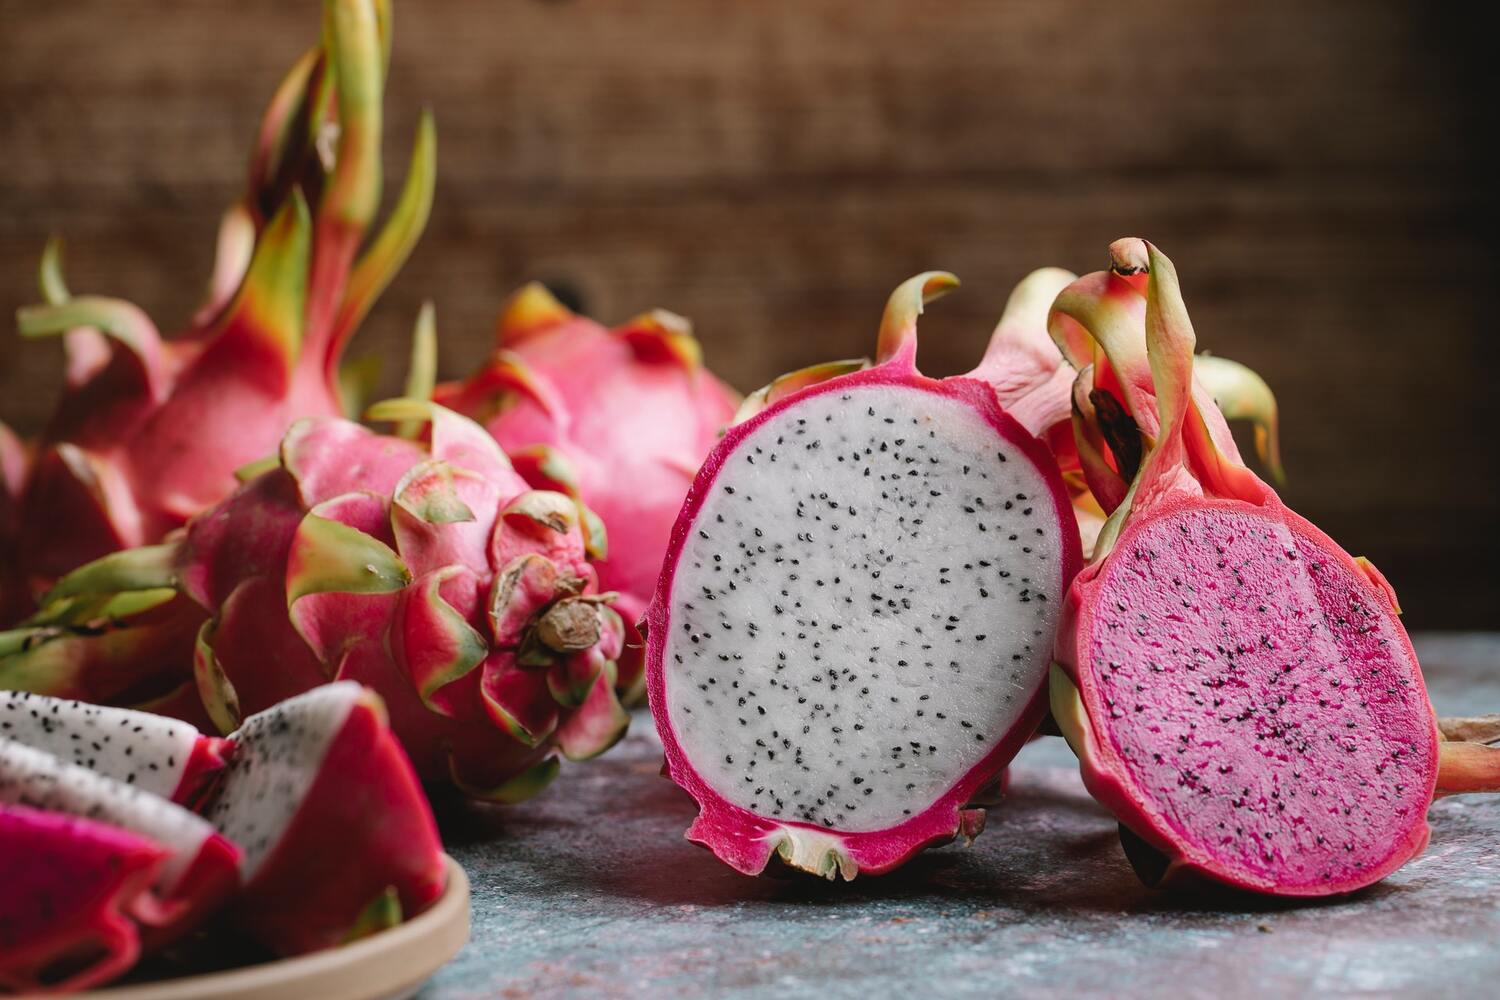 How To Store Cut Dragon Fruit